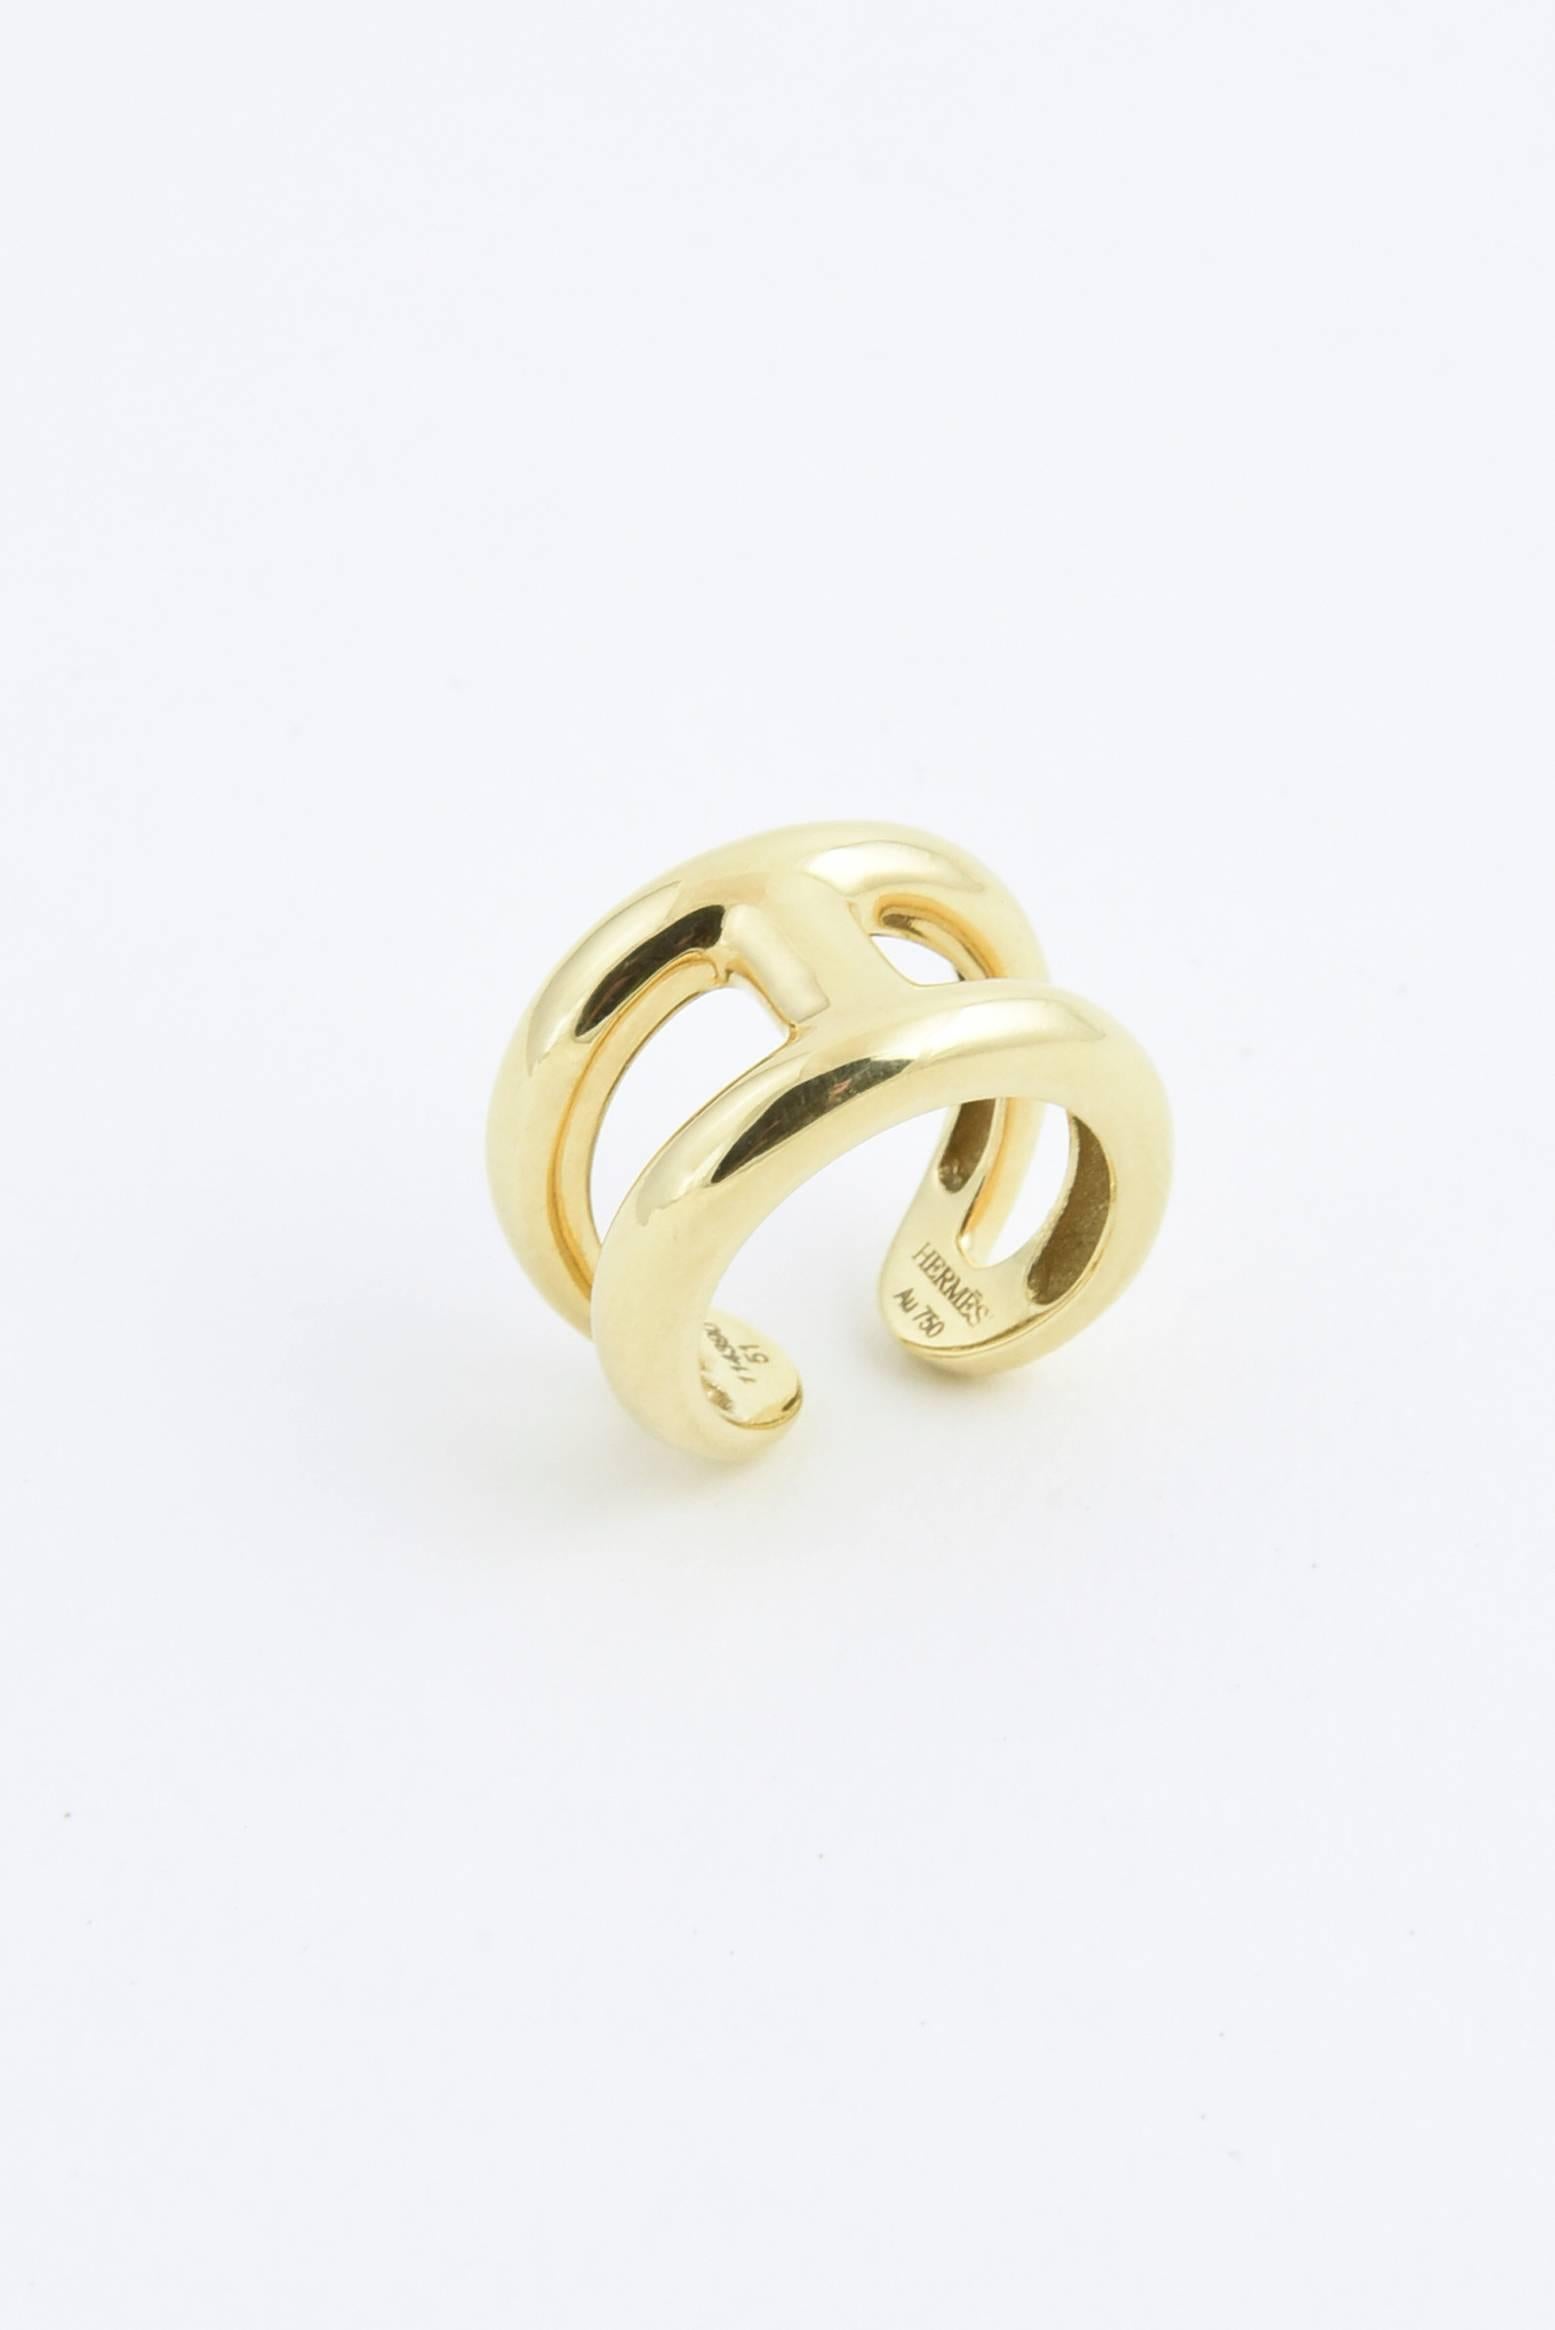 Hermès Osmose Ring
Ring is made of 18k yellow gold
Size 6

